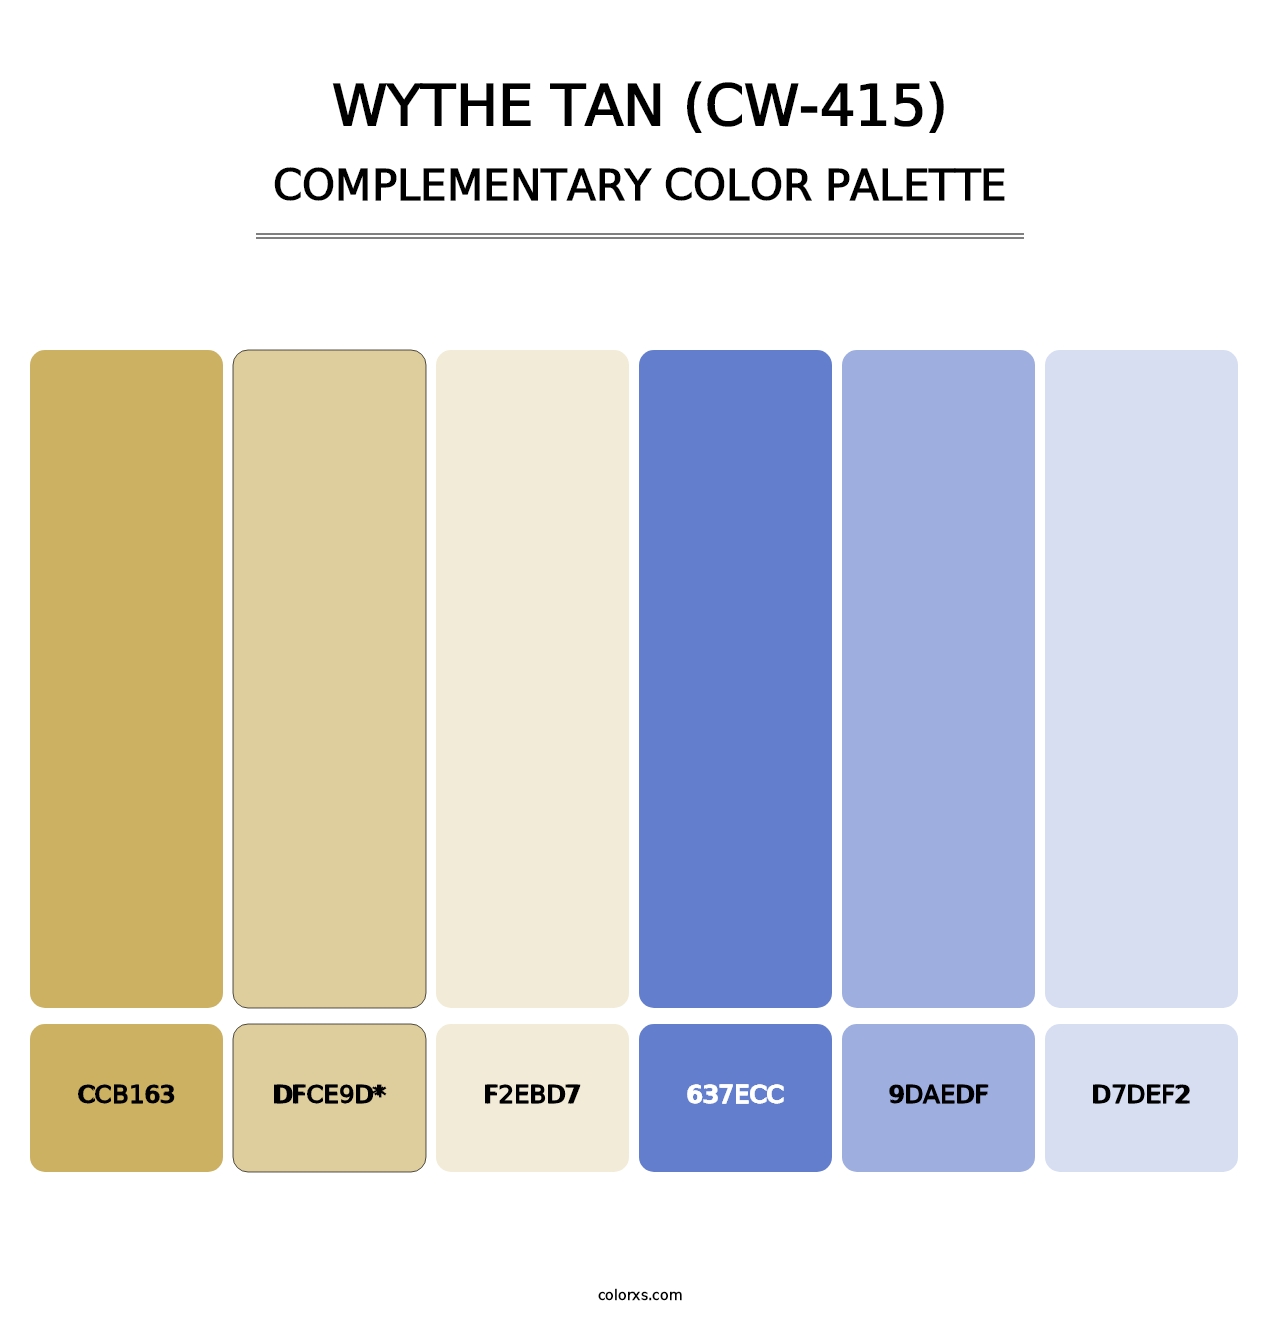 Wythe Tan (CW-415) - Complementary Color Palette